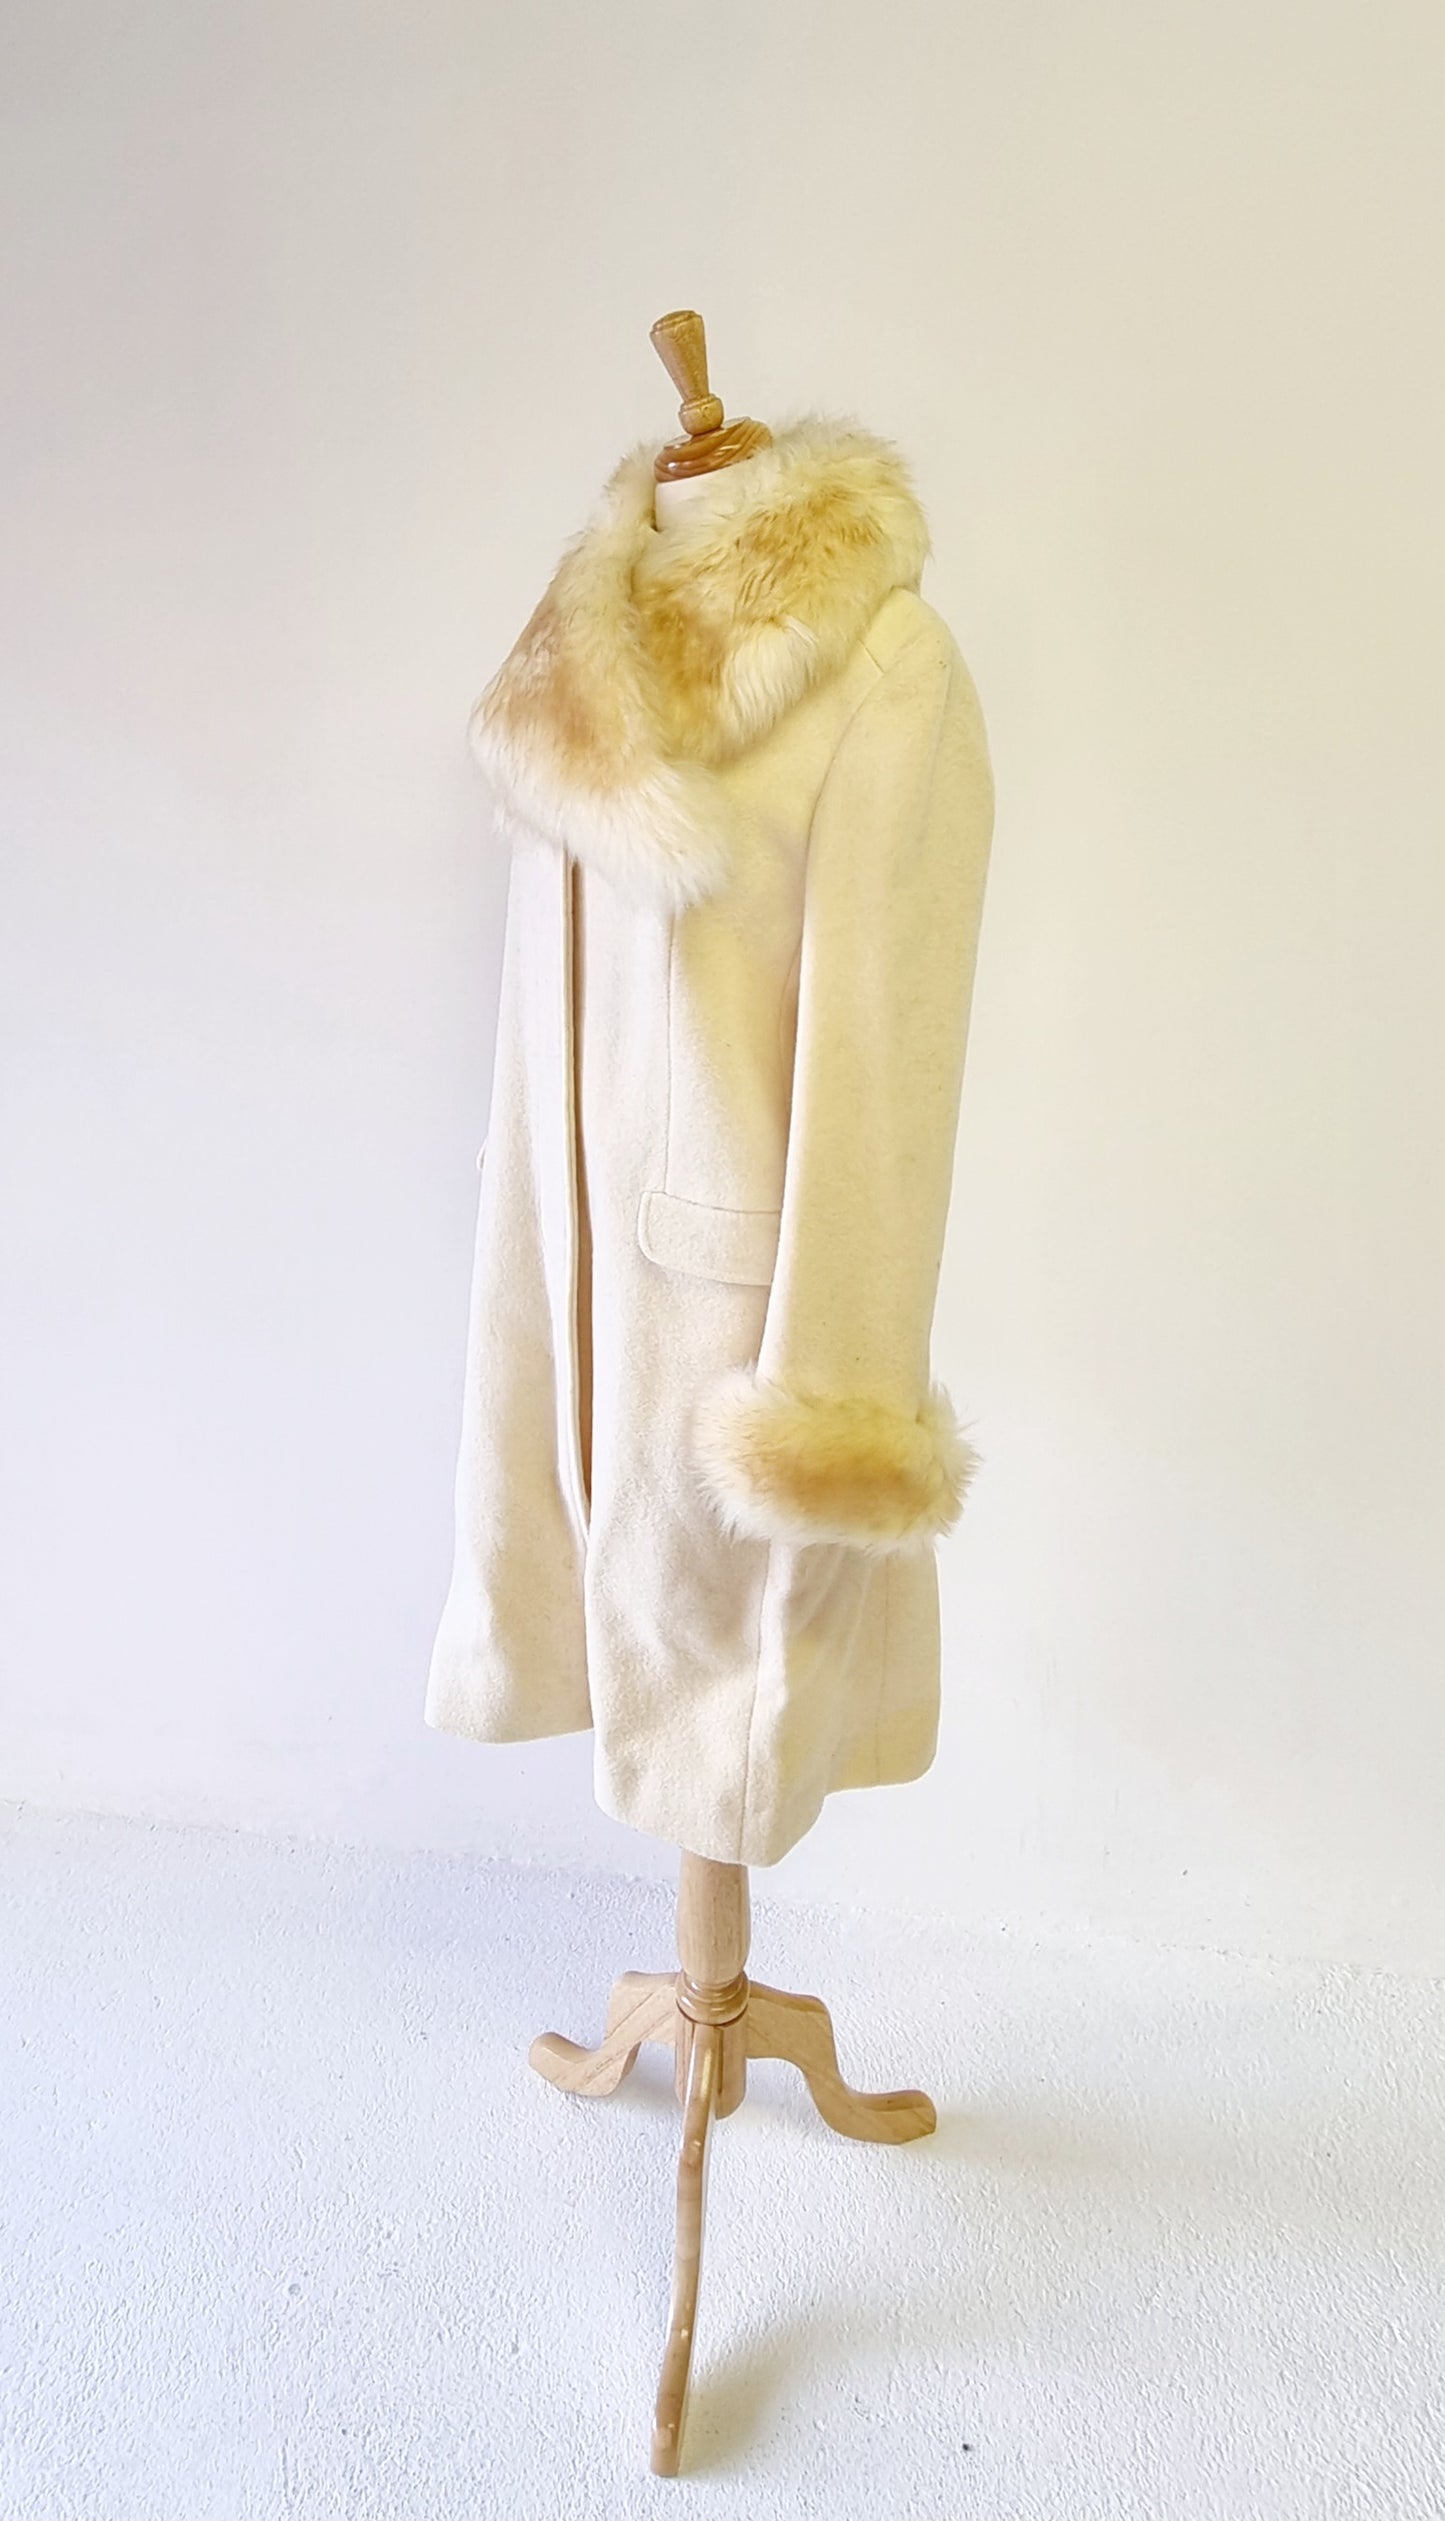 No Brand - Pure wool cream winter coat with faux fur